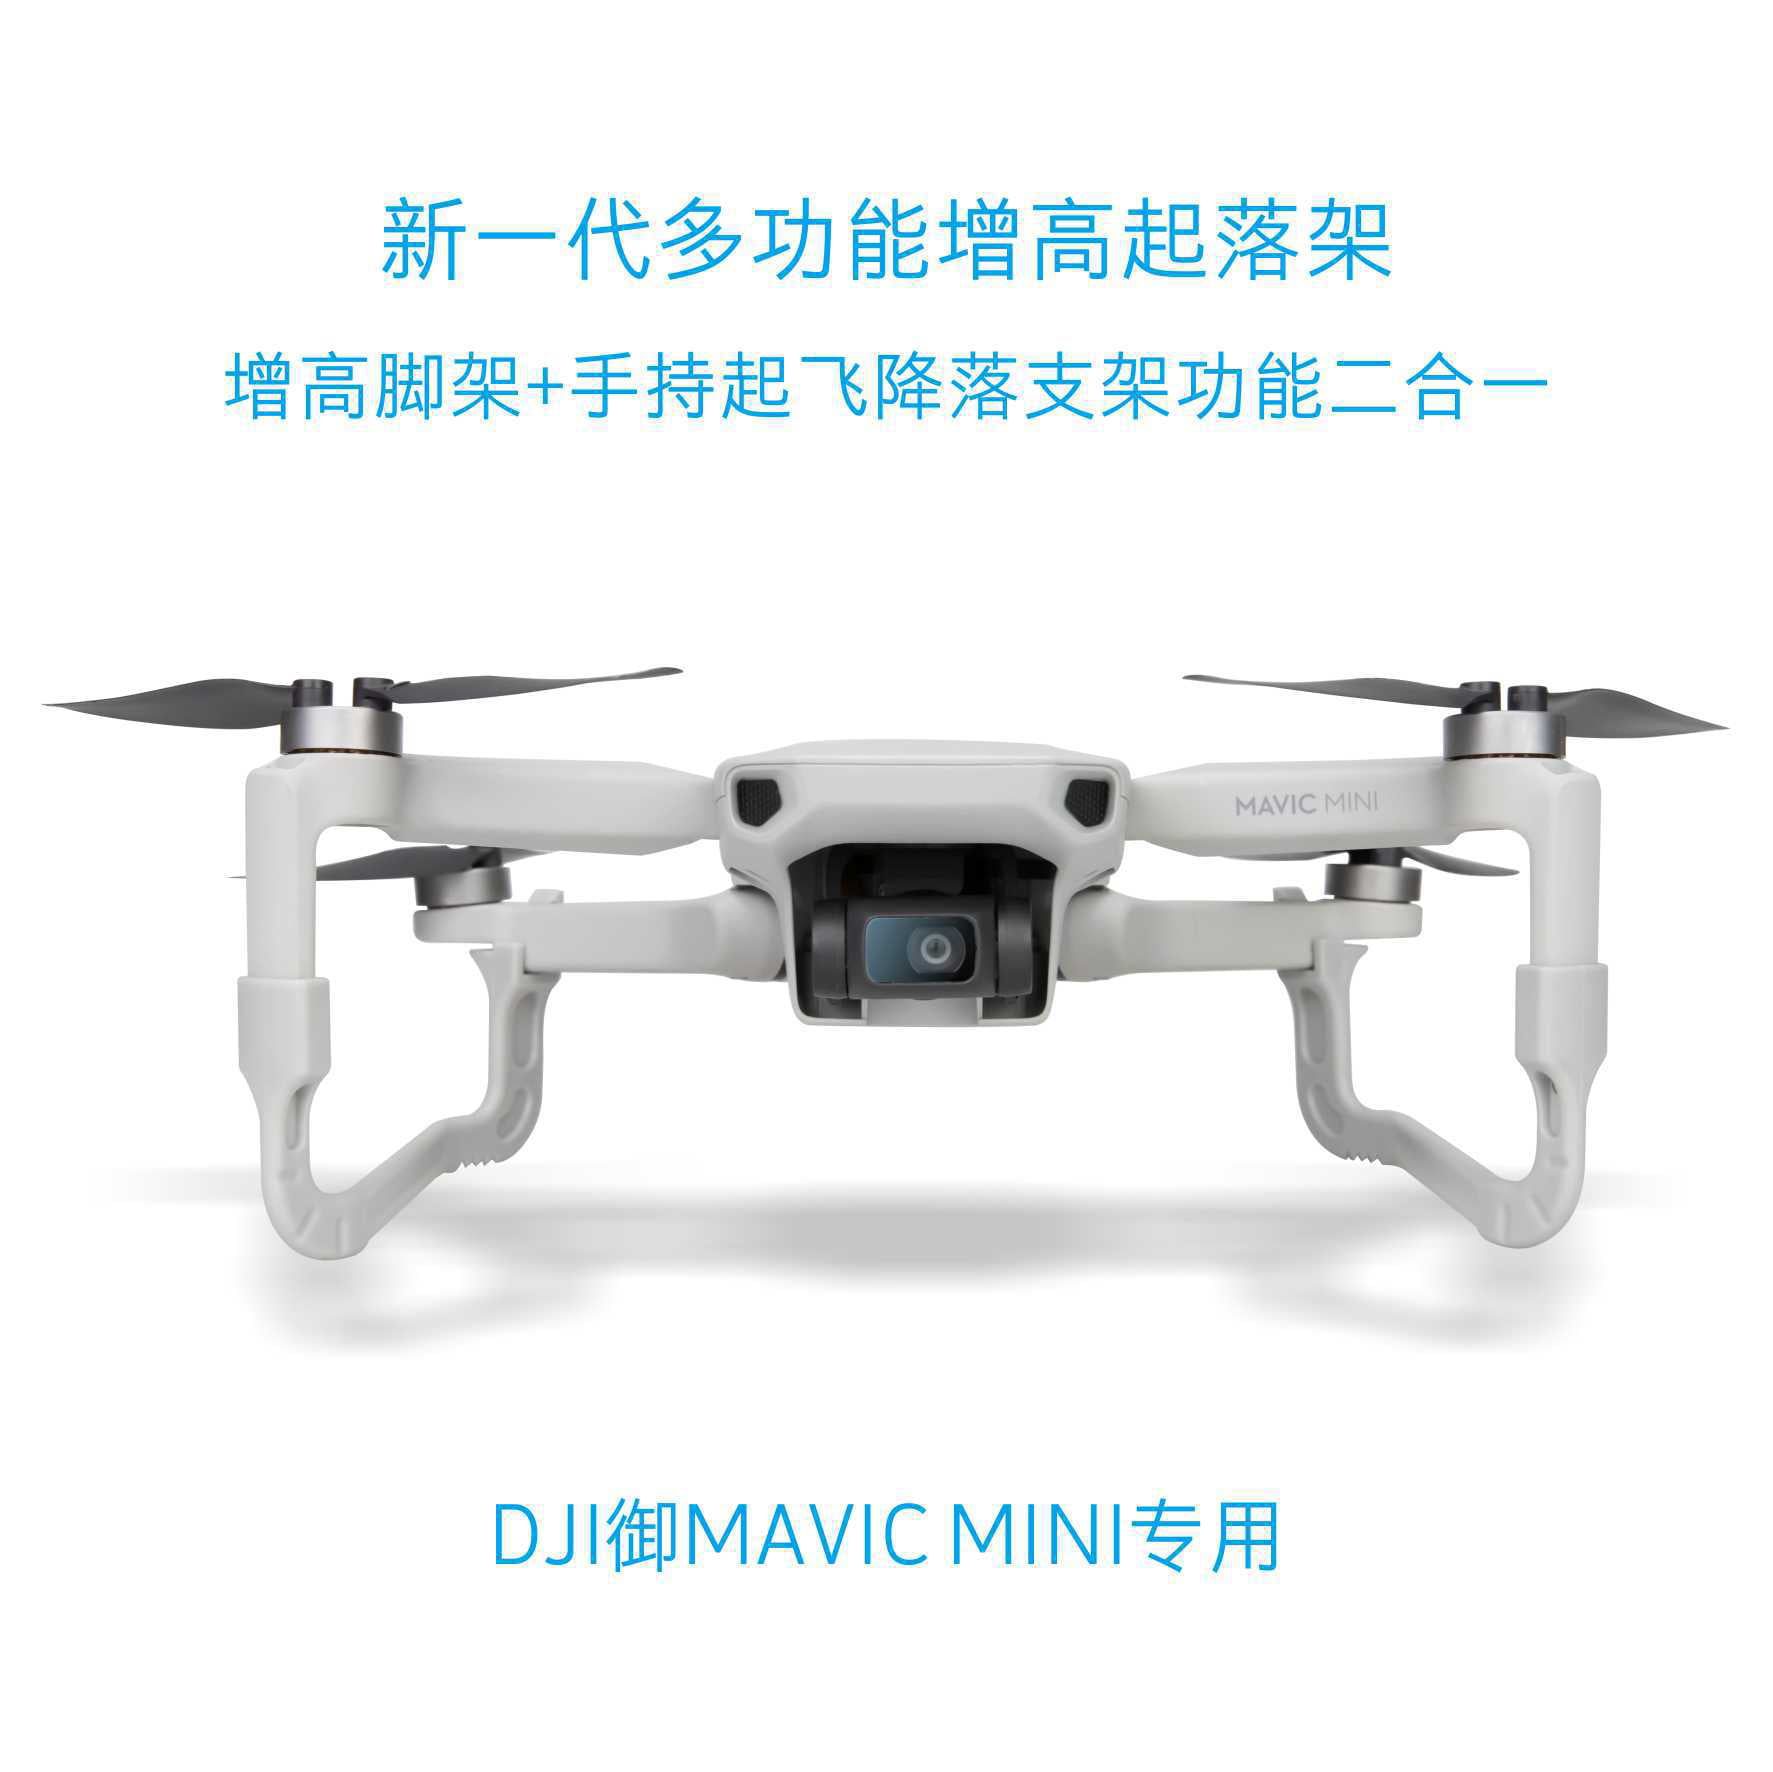 Landing Gear Extension Height Support Protector for DJI Mavic Mini Drone US